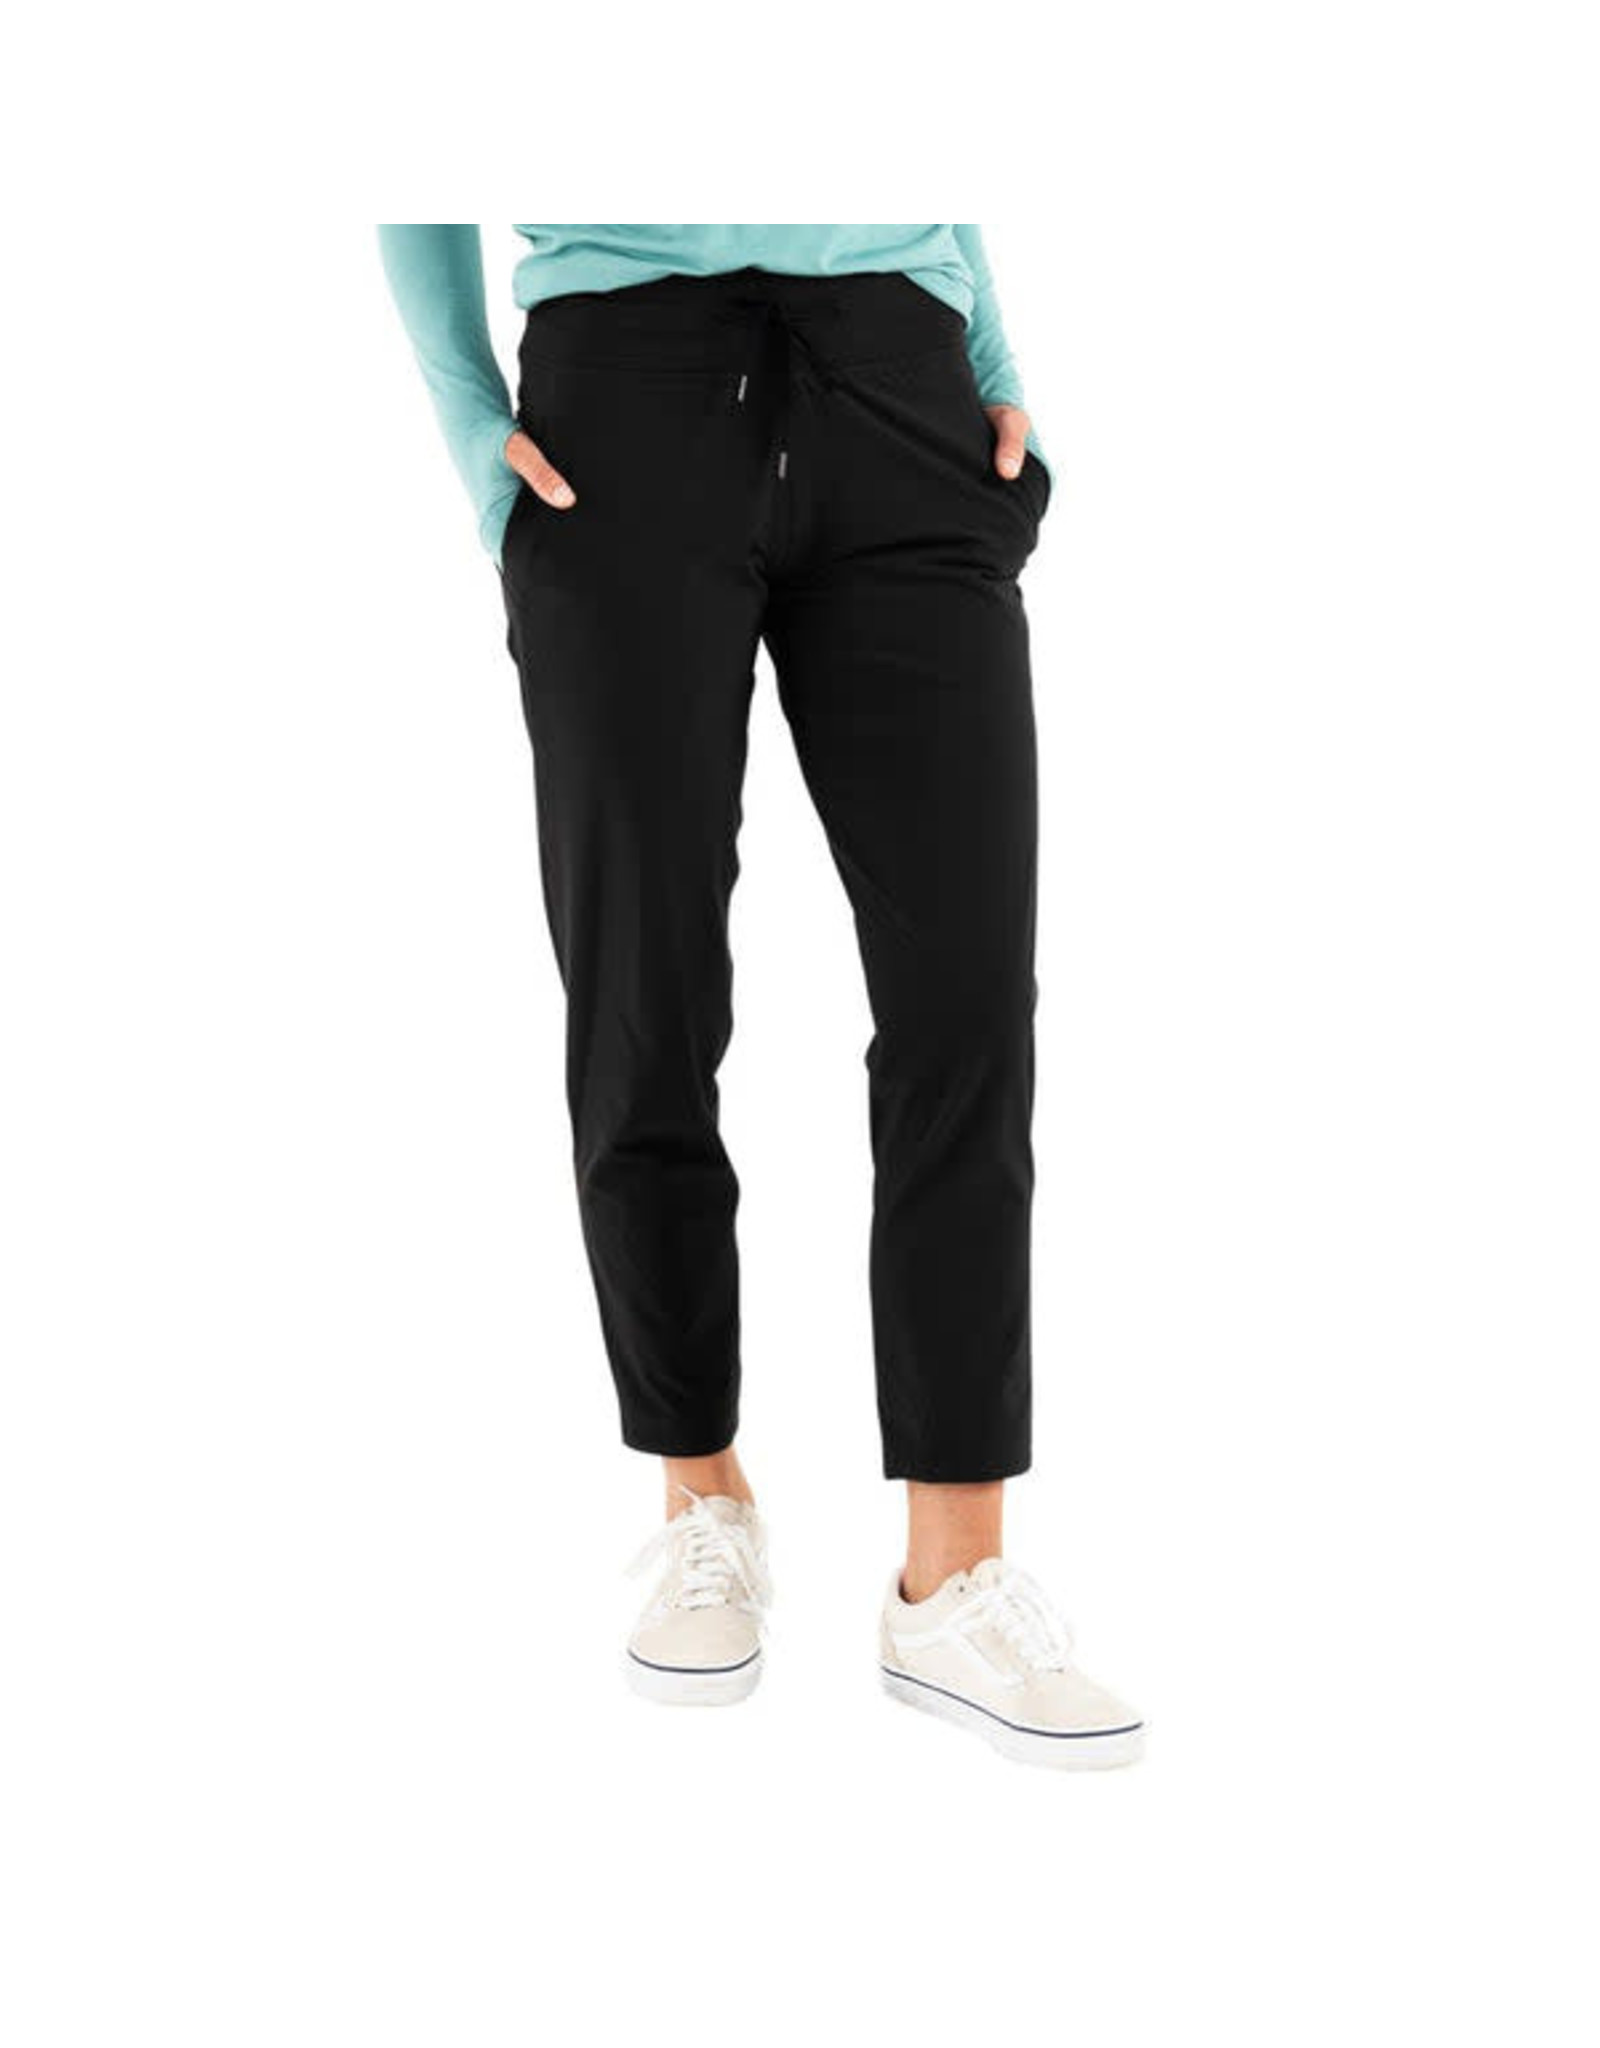 Free Fly Free Fly W's Breeze Cropped Pants